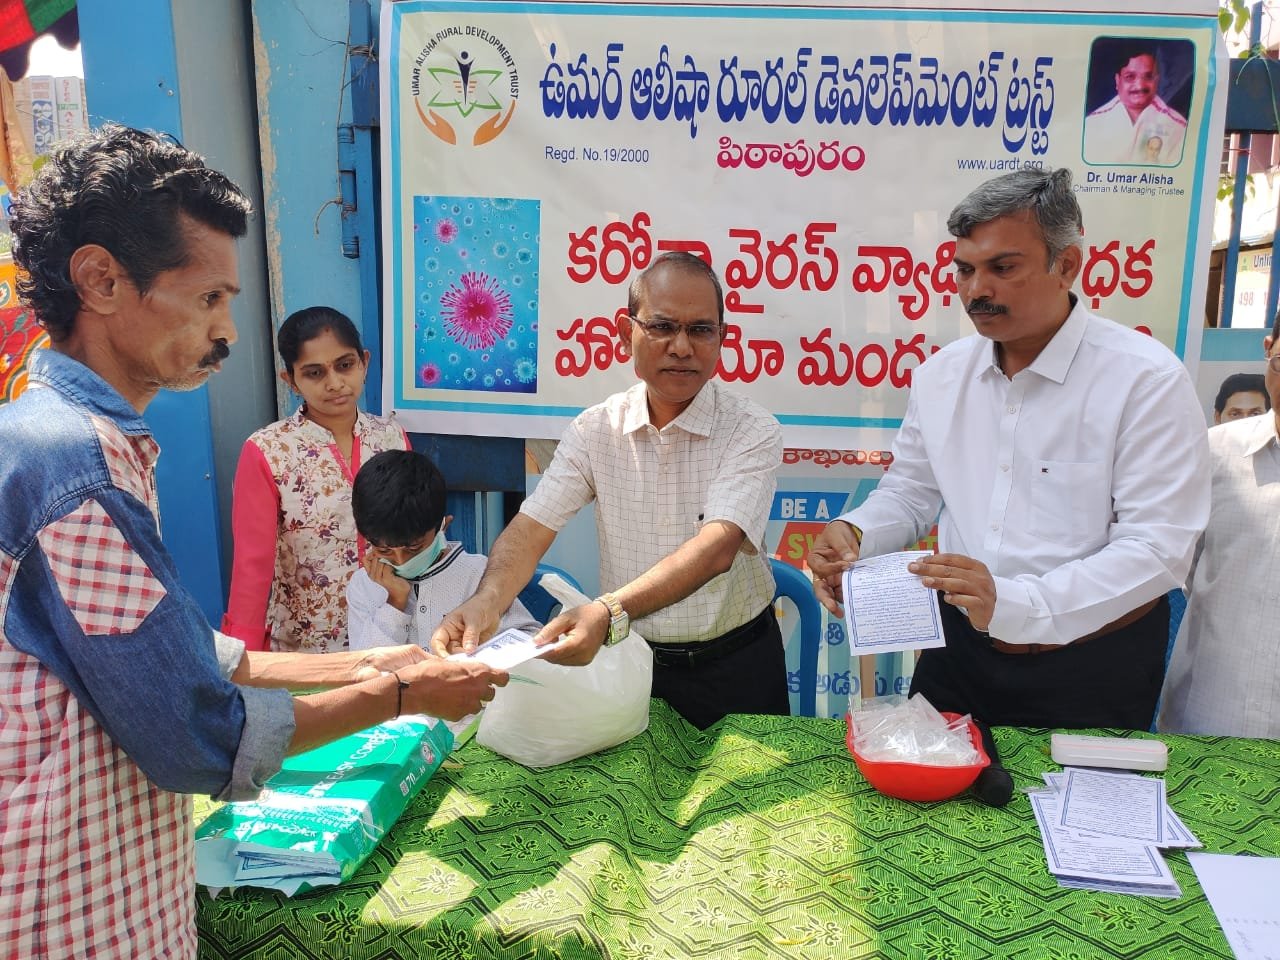 Coronavirus preventive medicine distributed by UARDT at B.S.N.L Office, Visakhapatnam on 10-March-2020